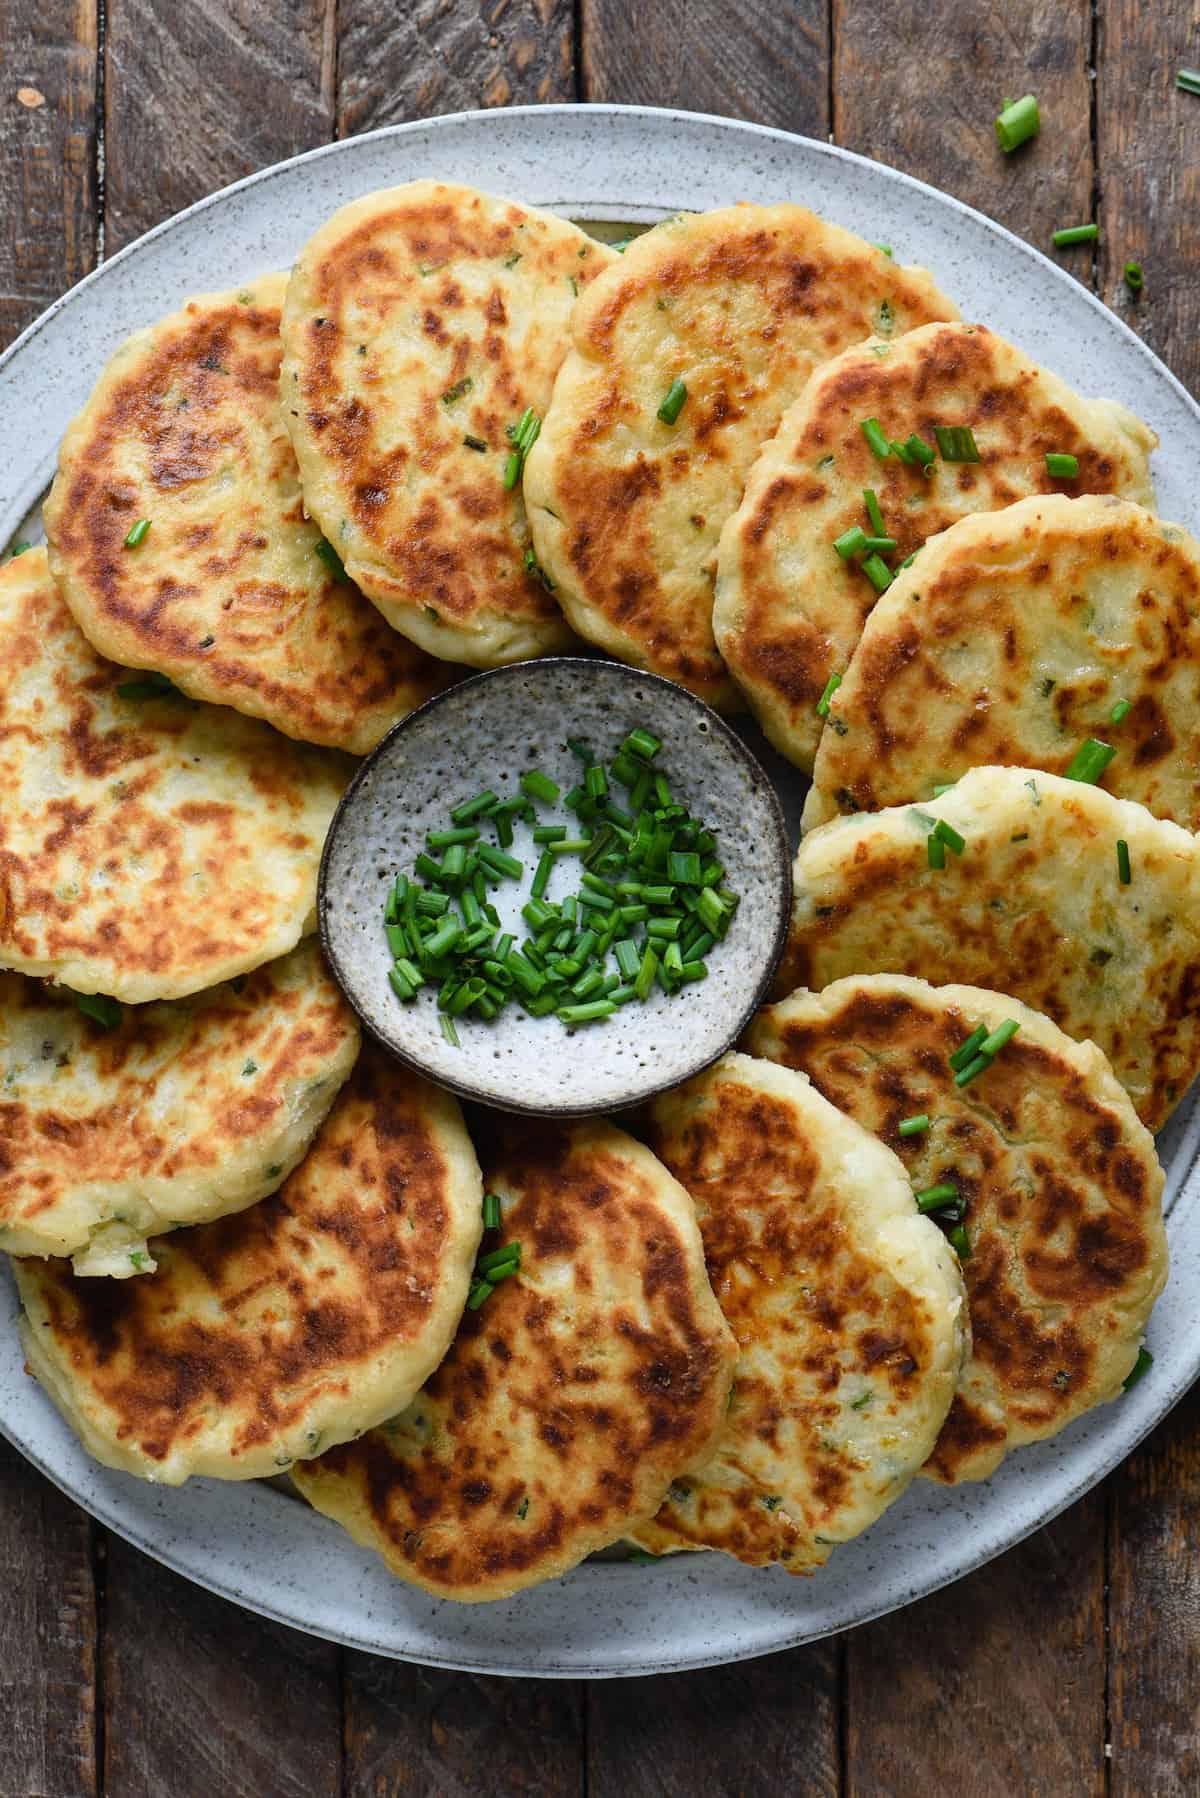 Potato Cakes From Mashed Potatoes - Foxes Love Lemons